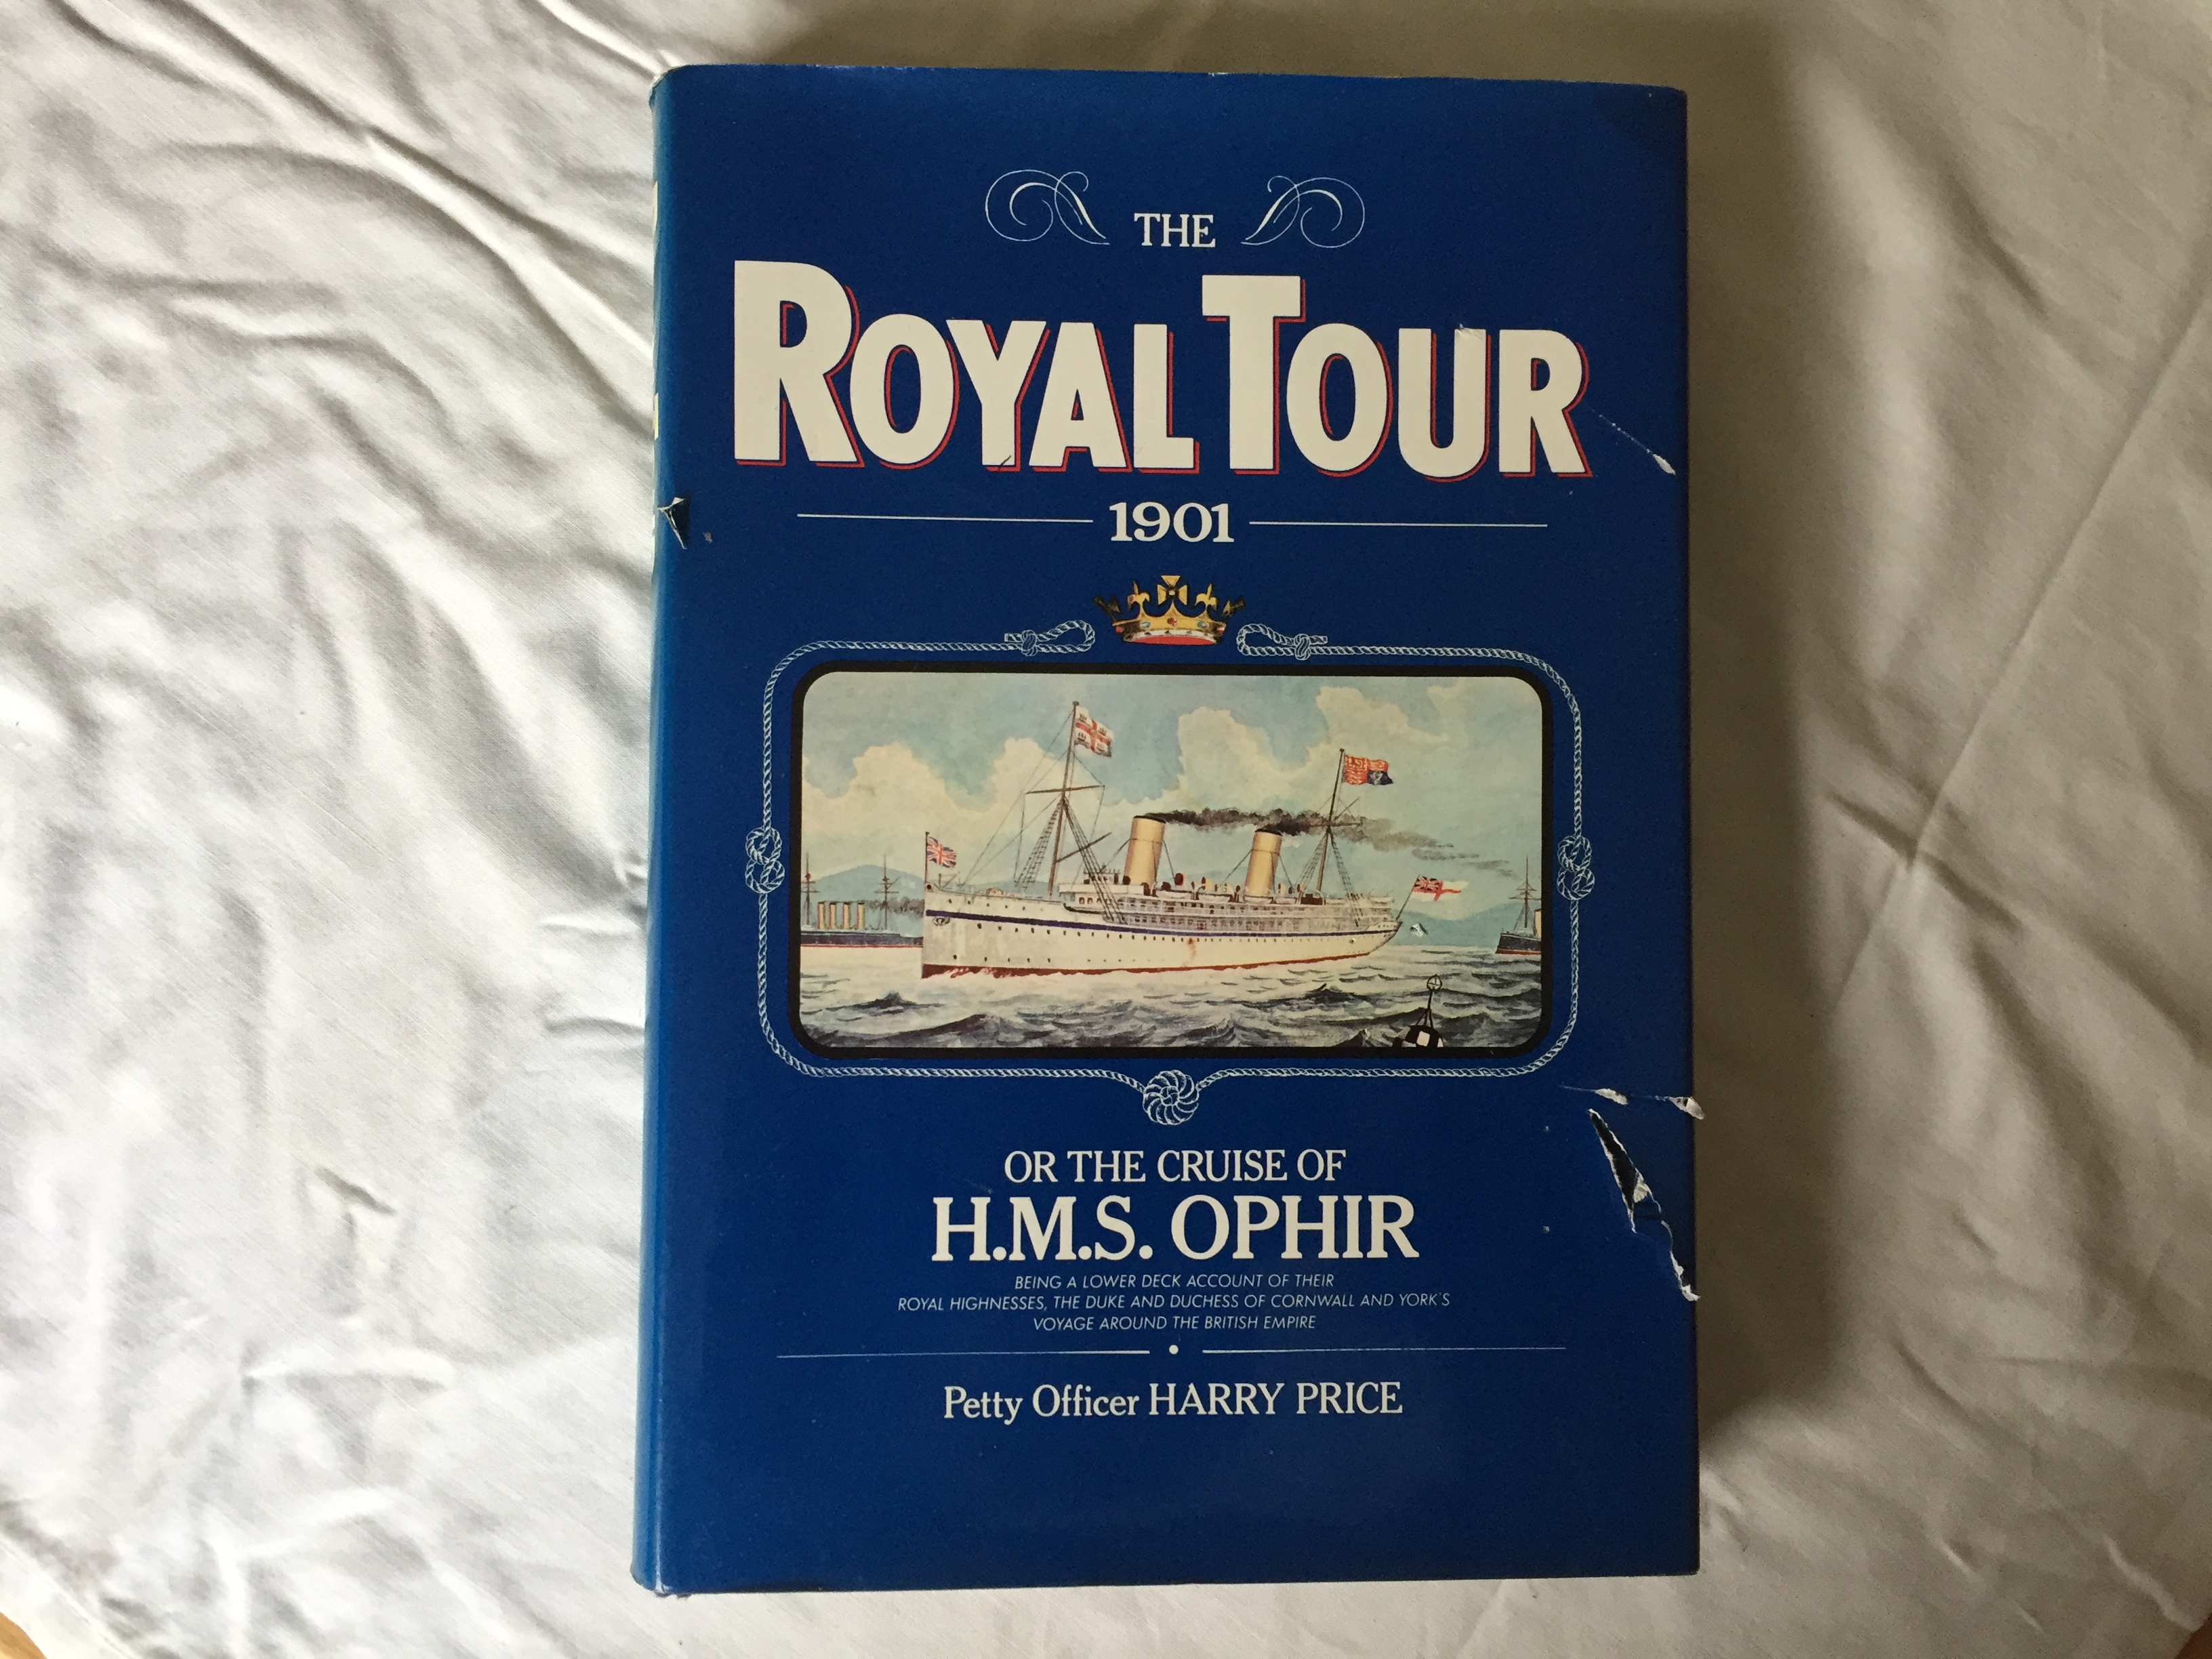 BOOK ‘THE ROYAL TOUR 1901’ – THE CRUISE OF THE HMS OPHIR BY PETTY OFFICER HARRY PRICE